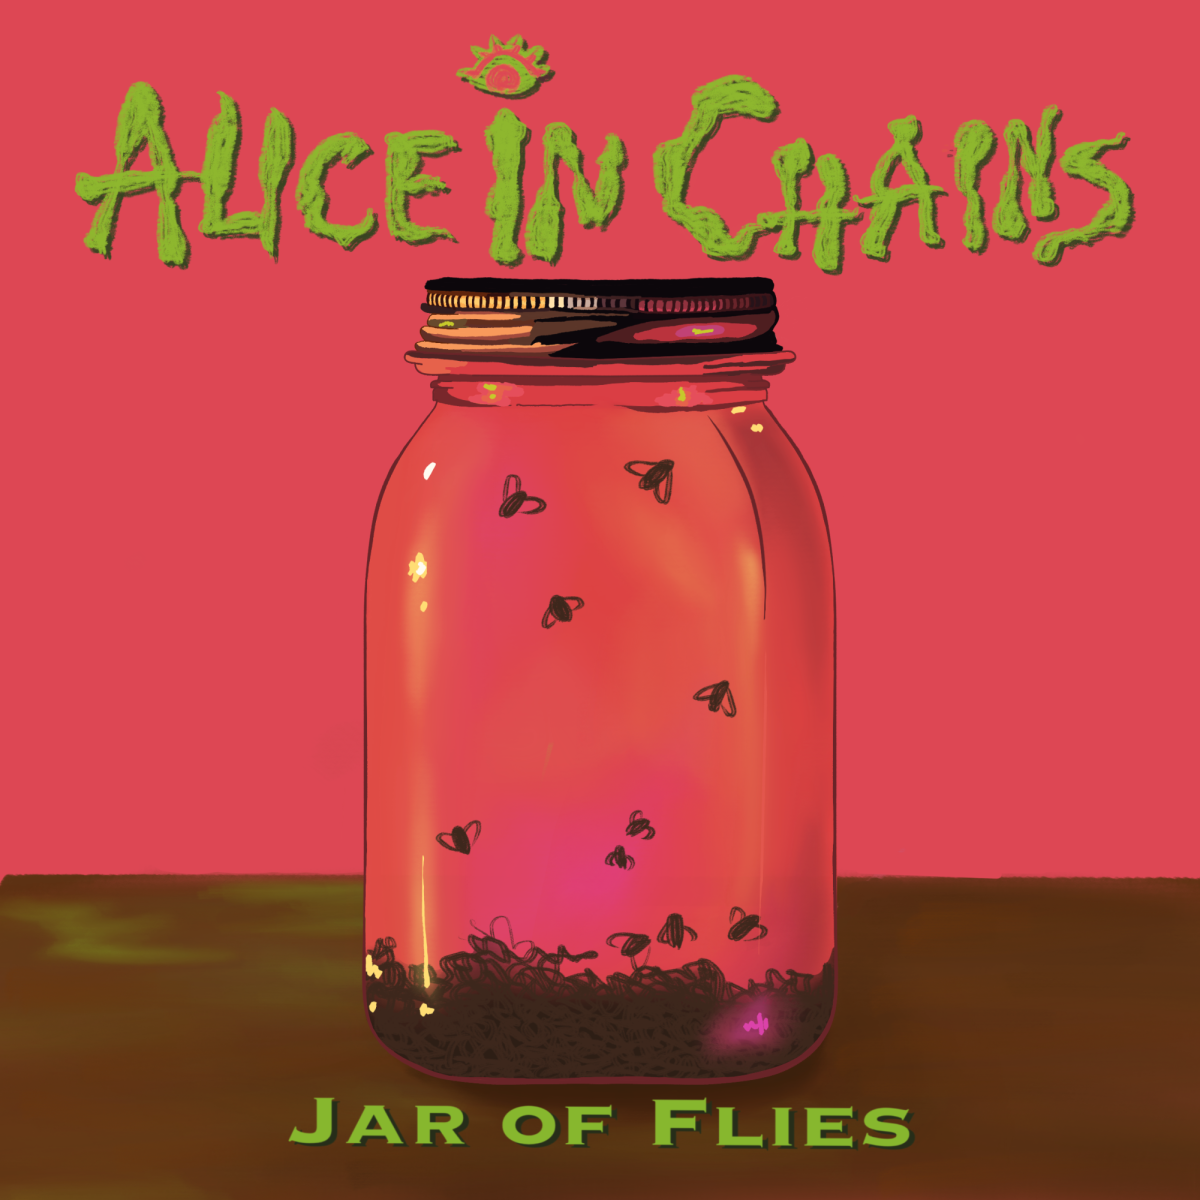 Album+of+the+week%3A+Alice+in+Chains%E2%80%99%E2%80%98Jar+of+Flies%E2%80%99